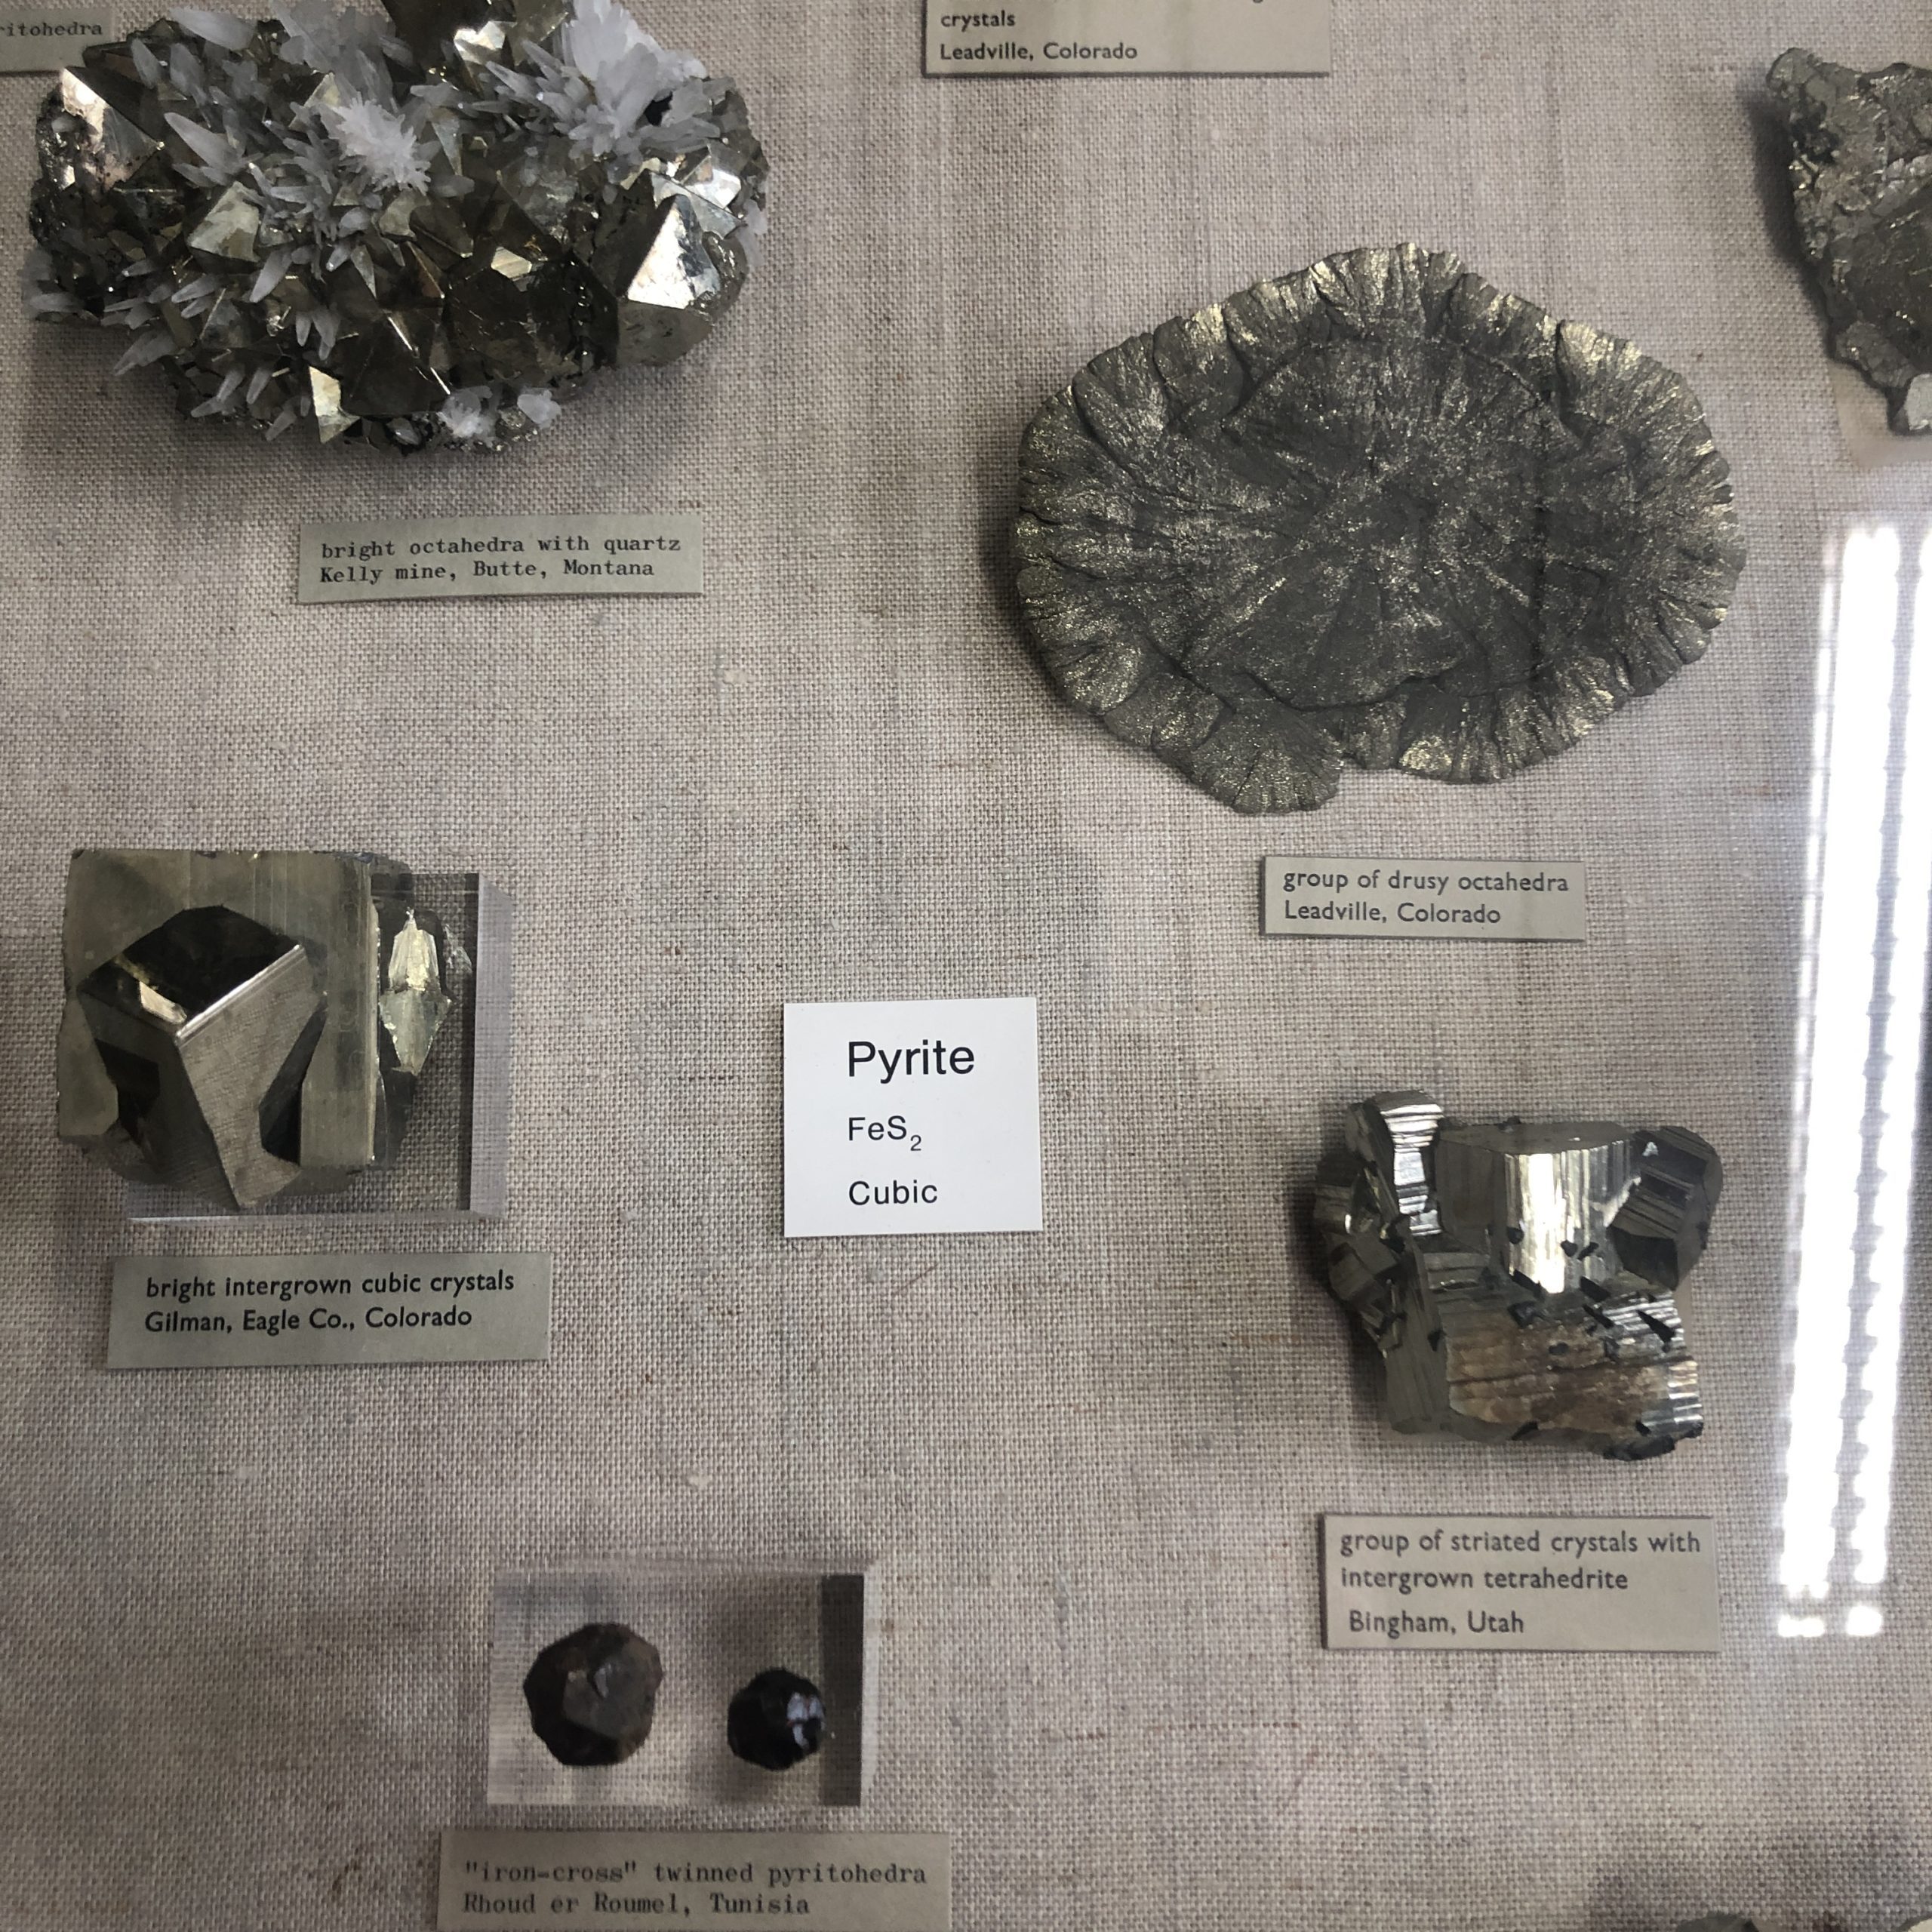 Pyrite from the Natural History Museum in London